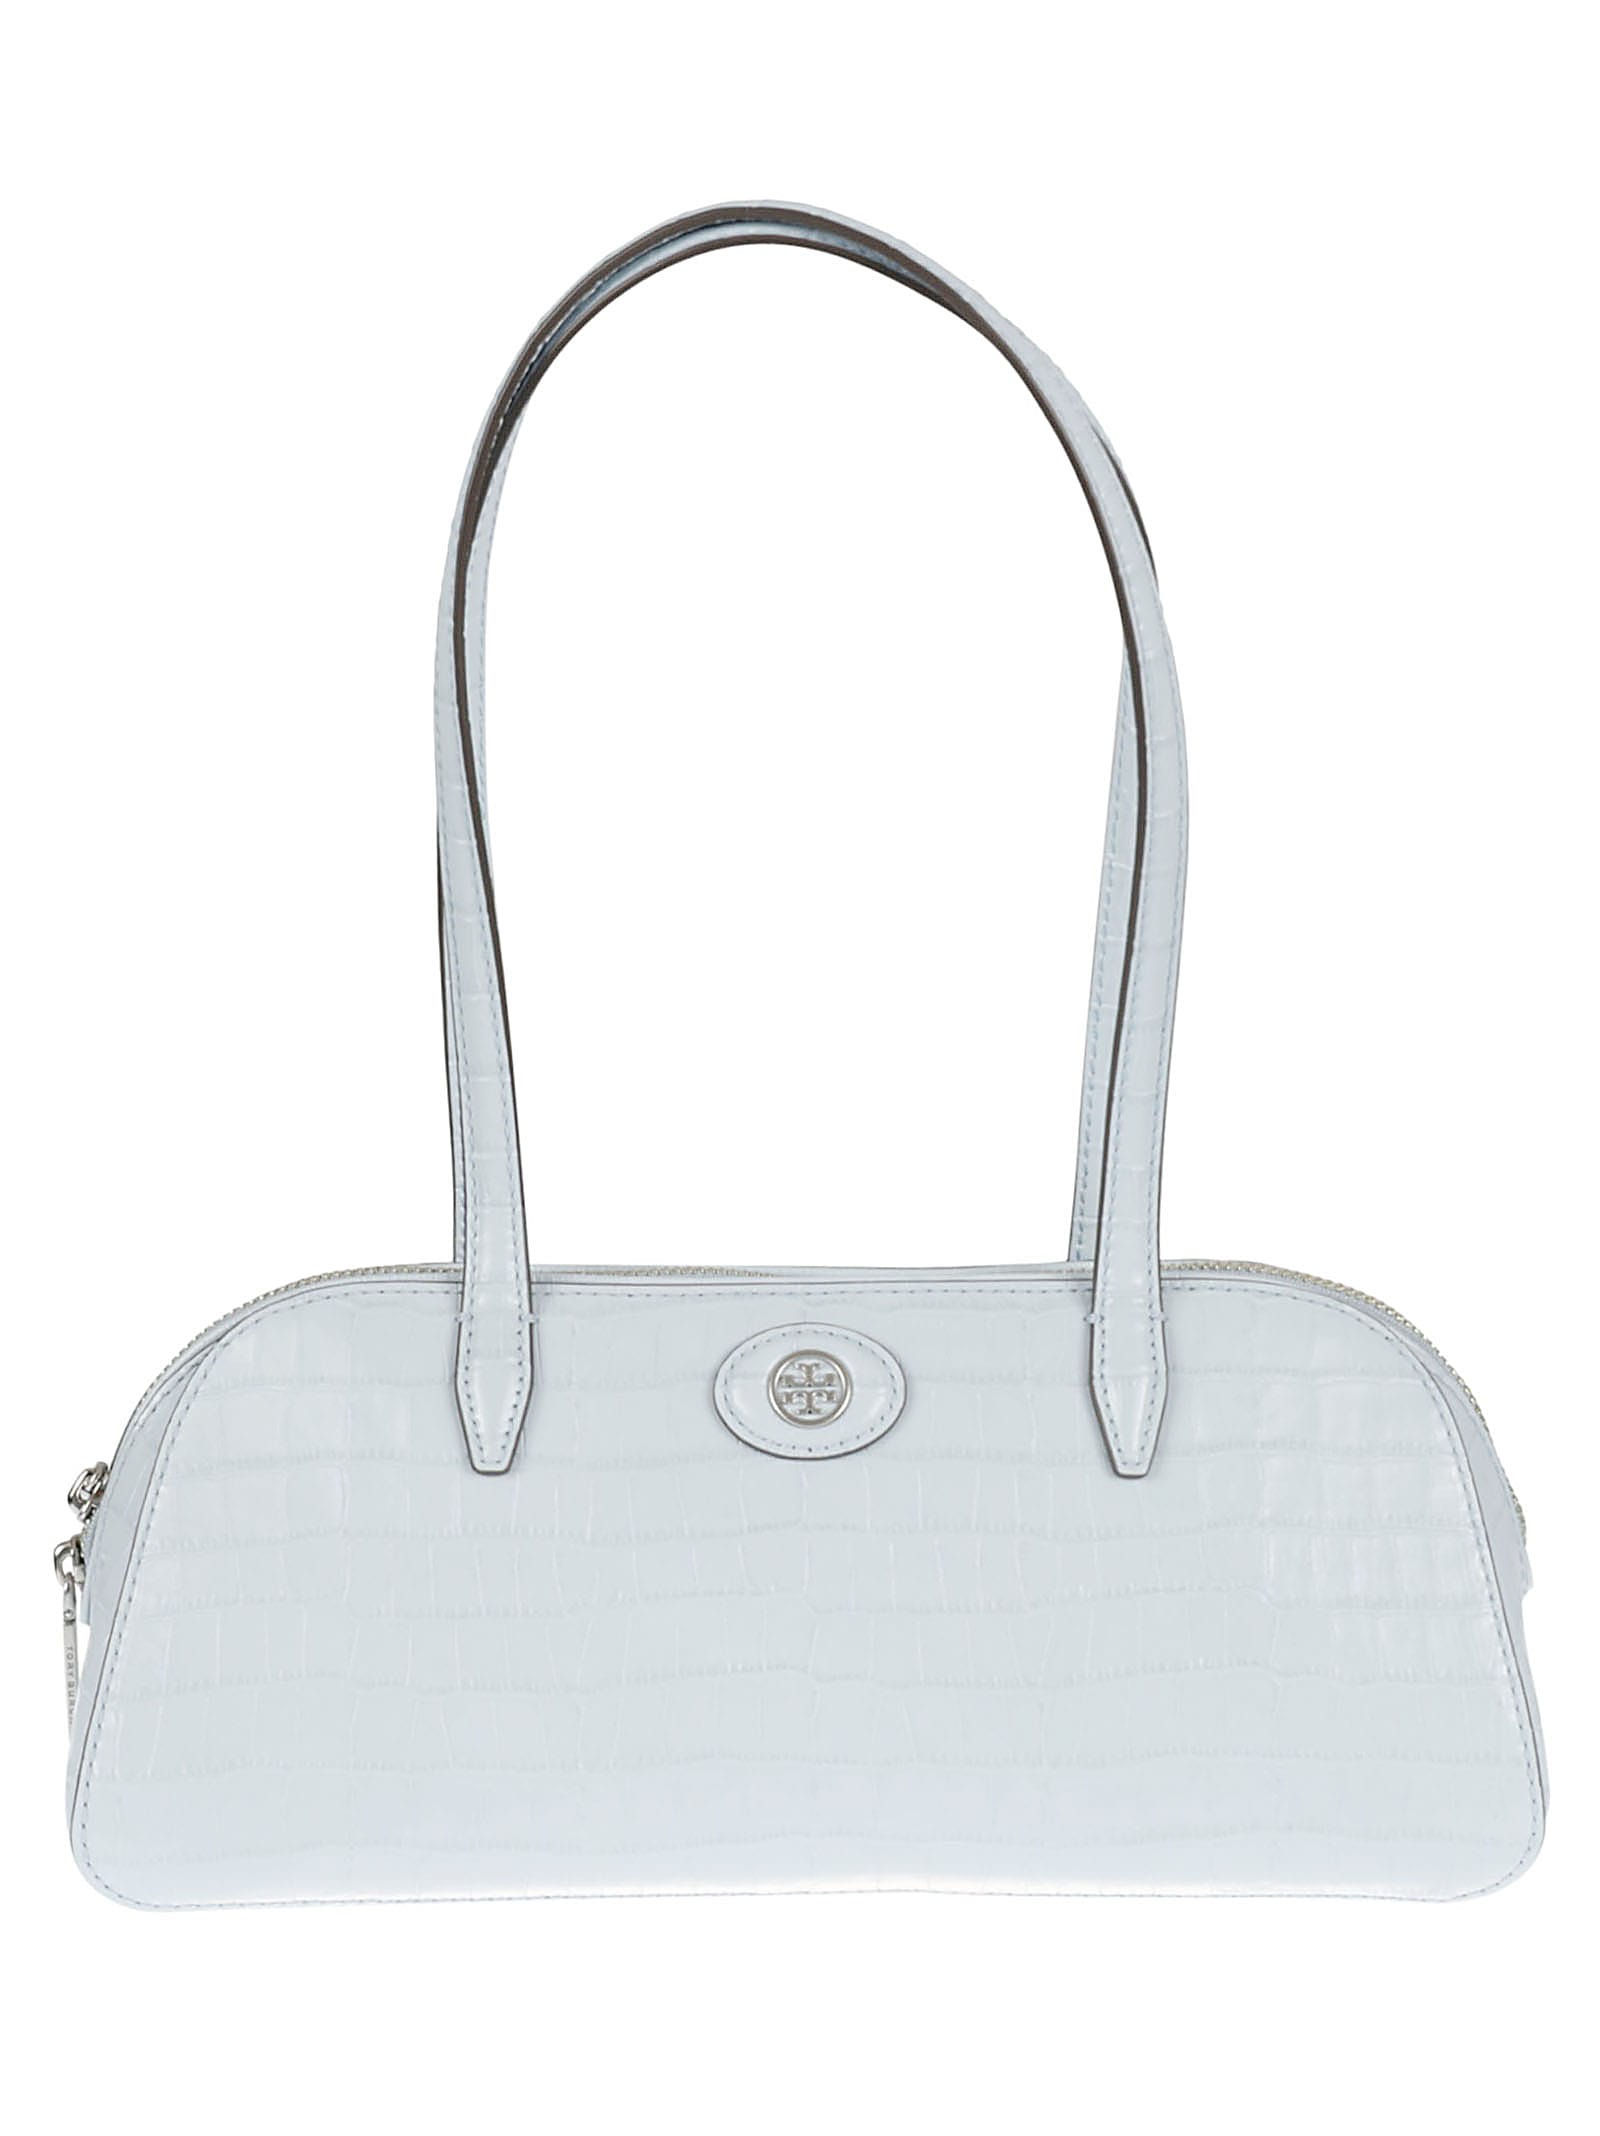 Tory Burch Robinson Embossed Small Tote